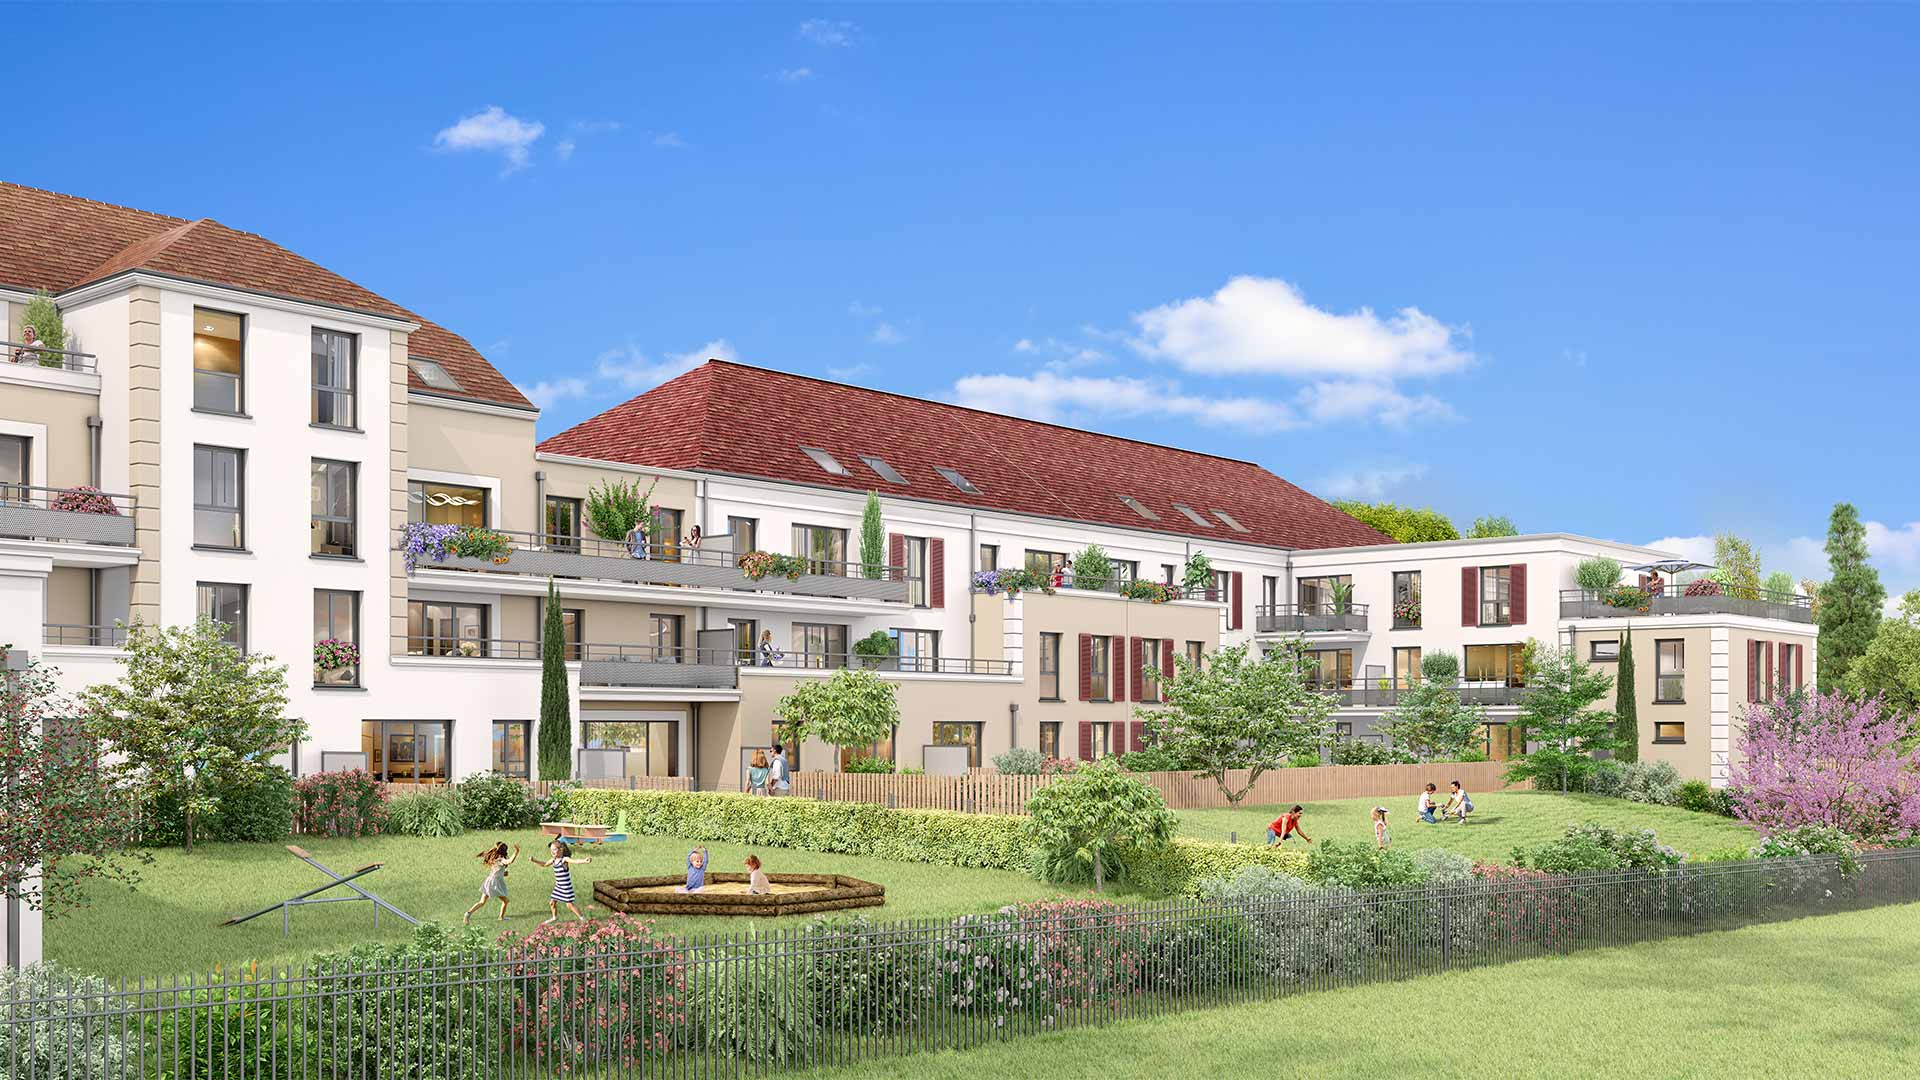 Programme immobilier neuf L'ultime